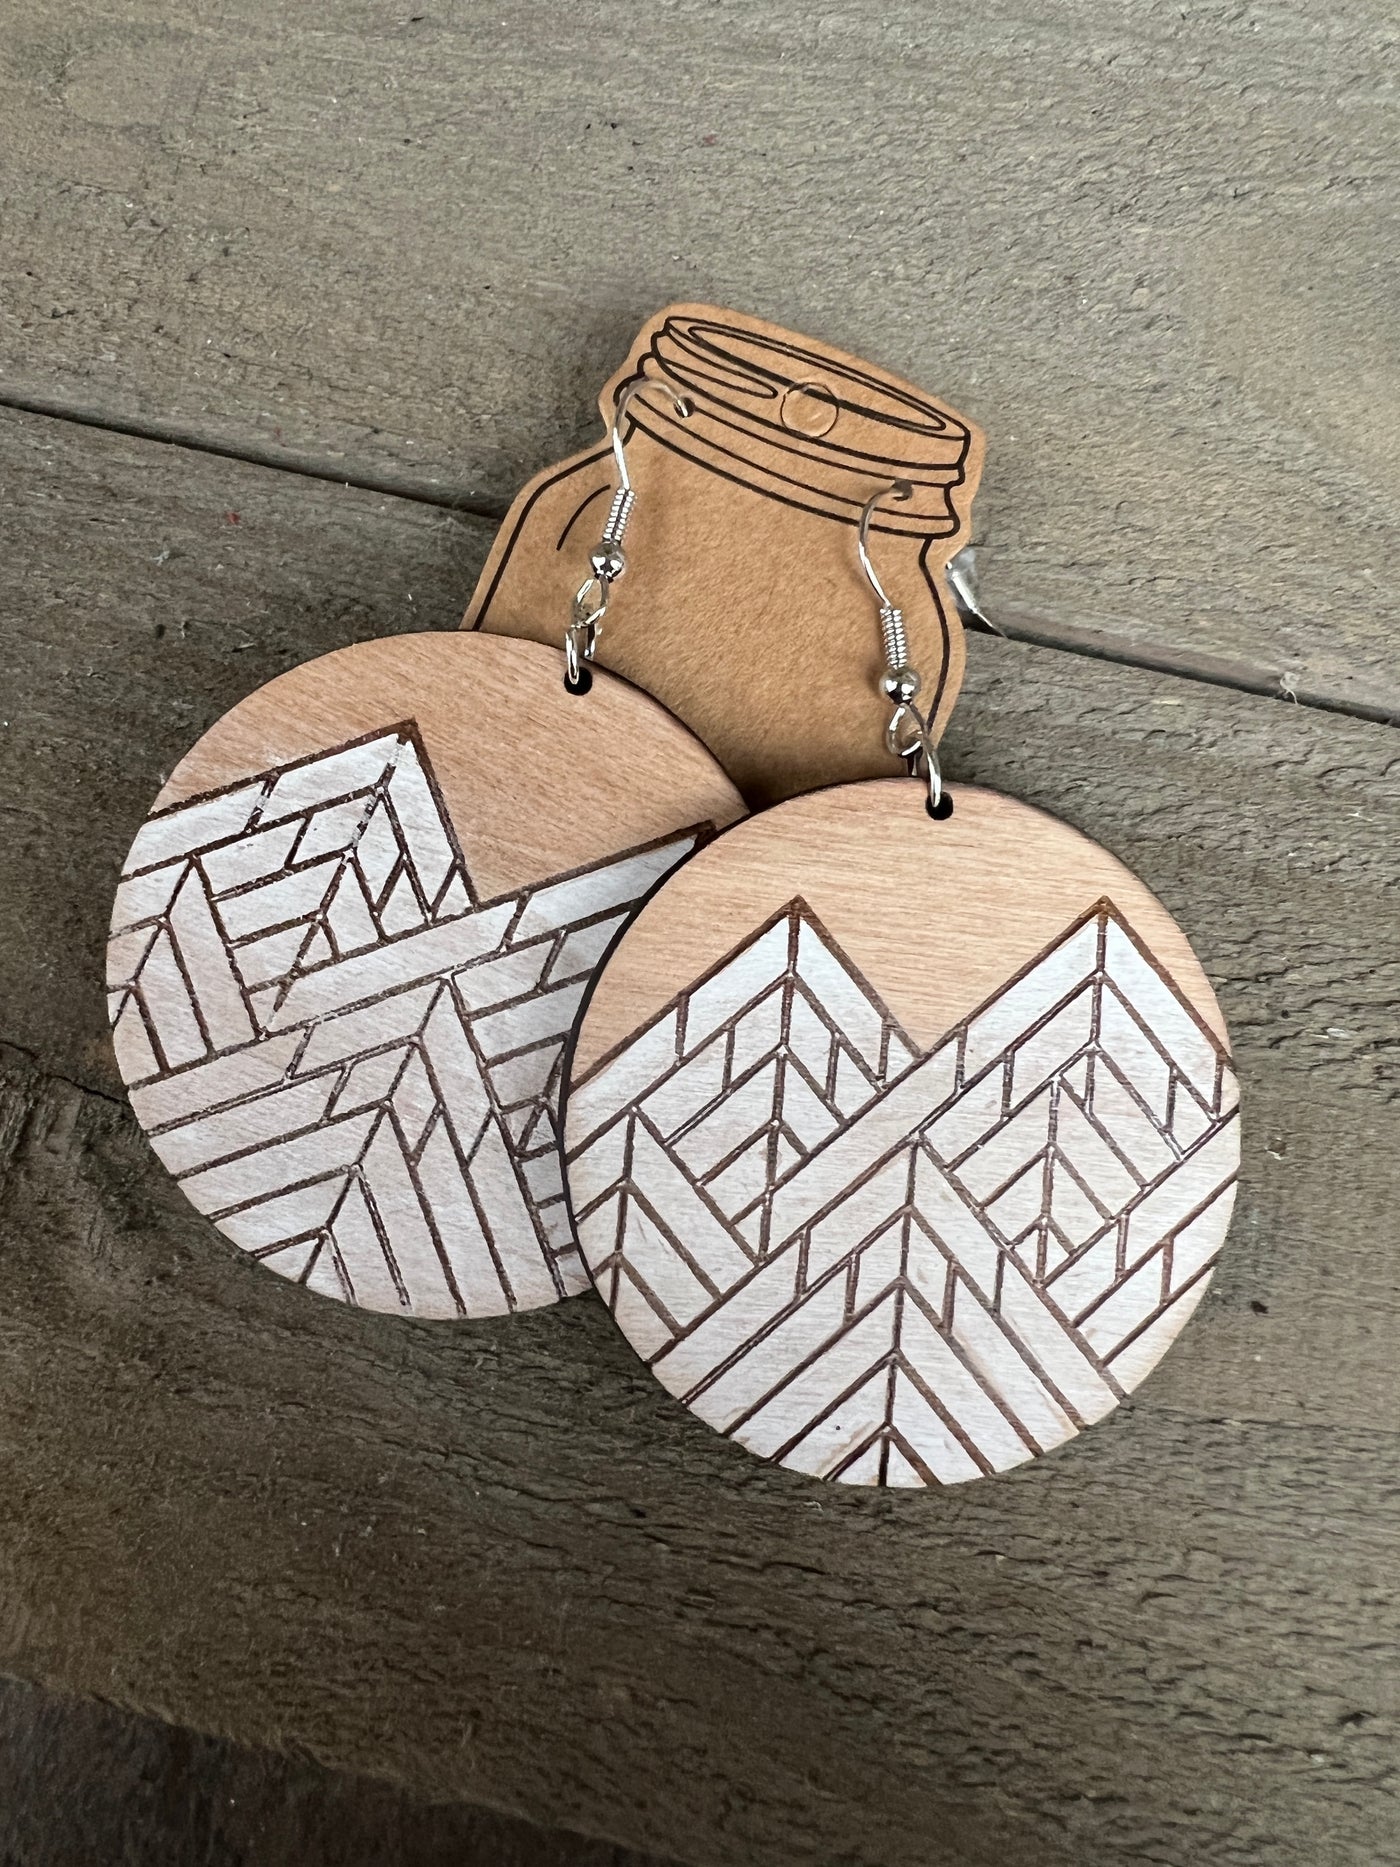 Rustic Mountain Round Engraved Wooden Earrings